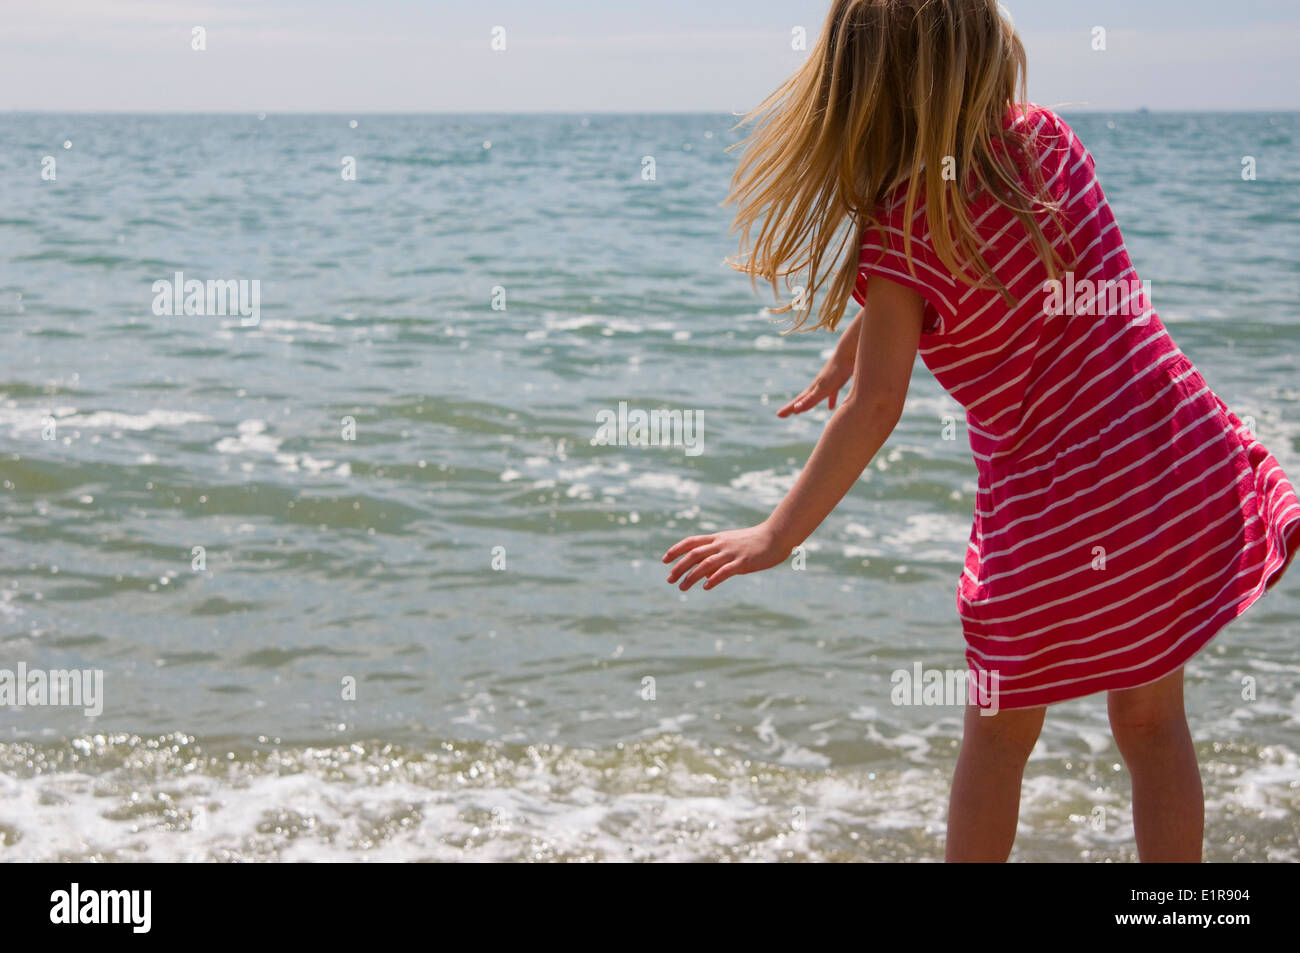 Action shot of young girl who has just thrown a pebble into the sea. Stock Photo